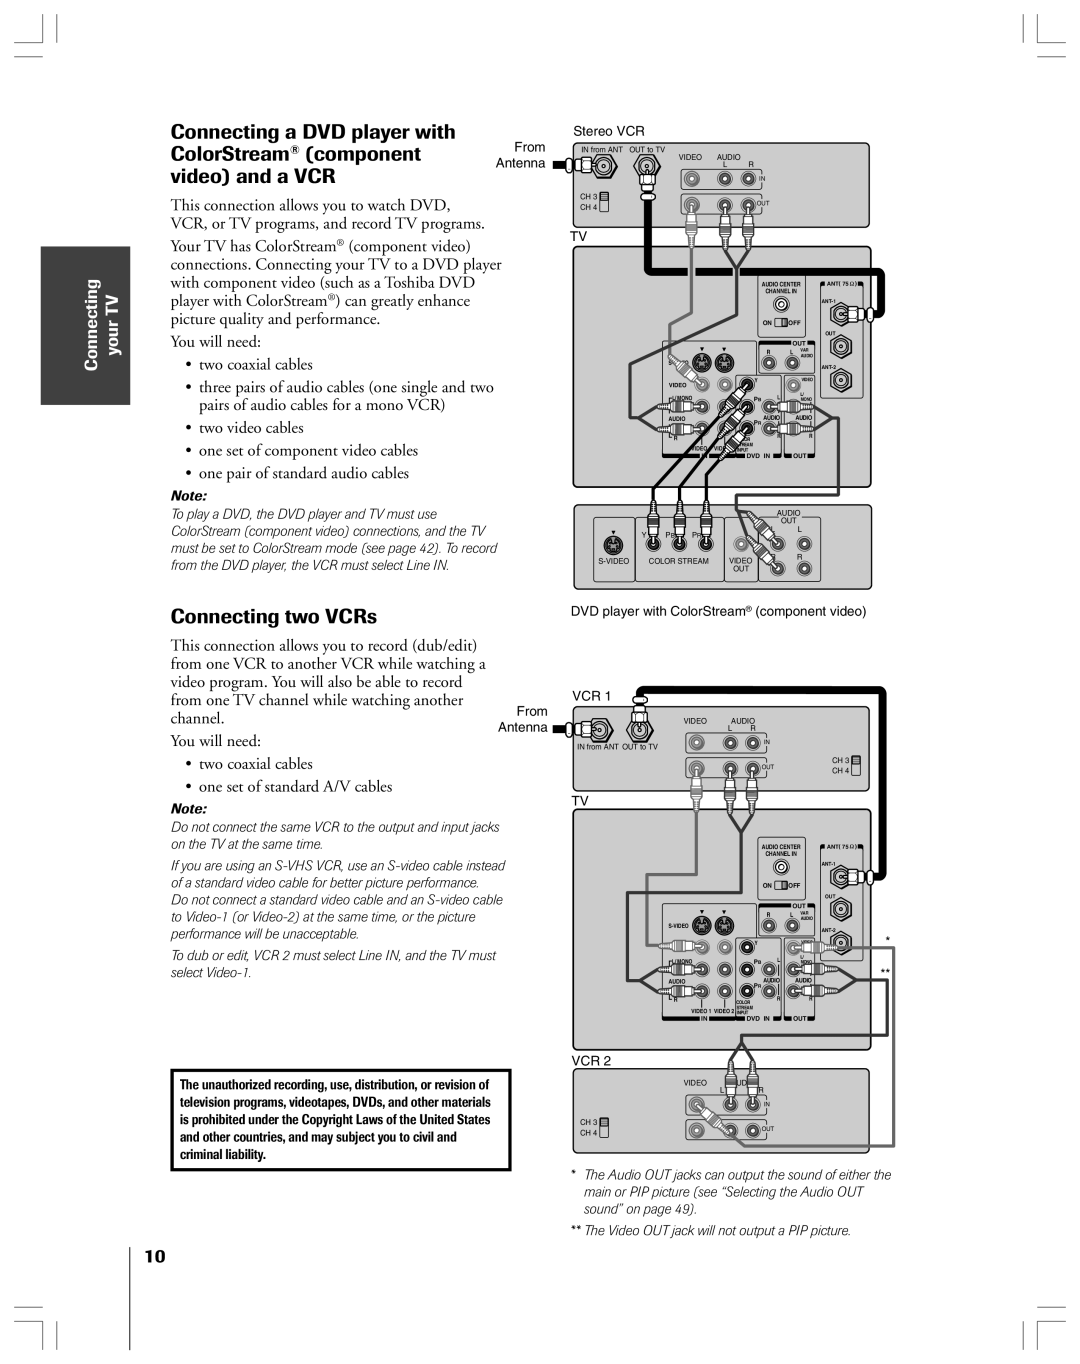 Toshiba 53AX62 owner manual Connecting a DVD player with ColorStream component From, video and a VCR, Connecting two VCRs 